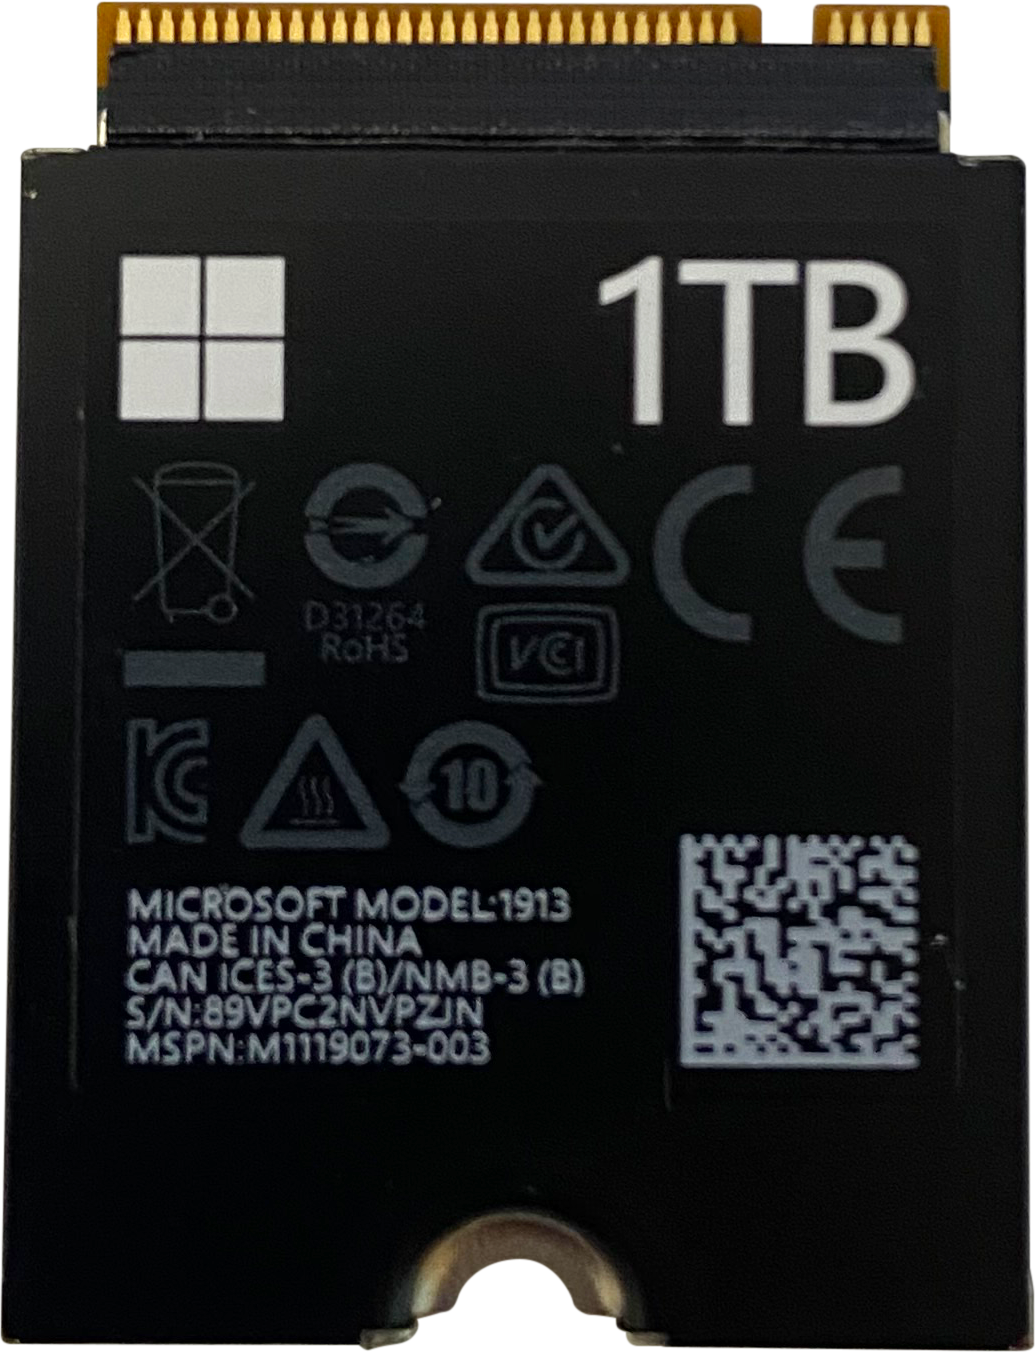 Replacement SSD for Surface Laptop 3 - 1TB SSD, Model 1873